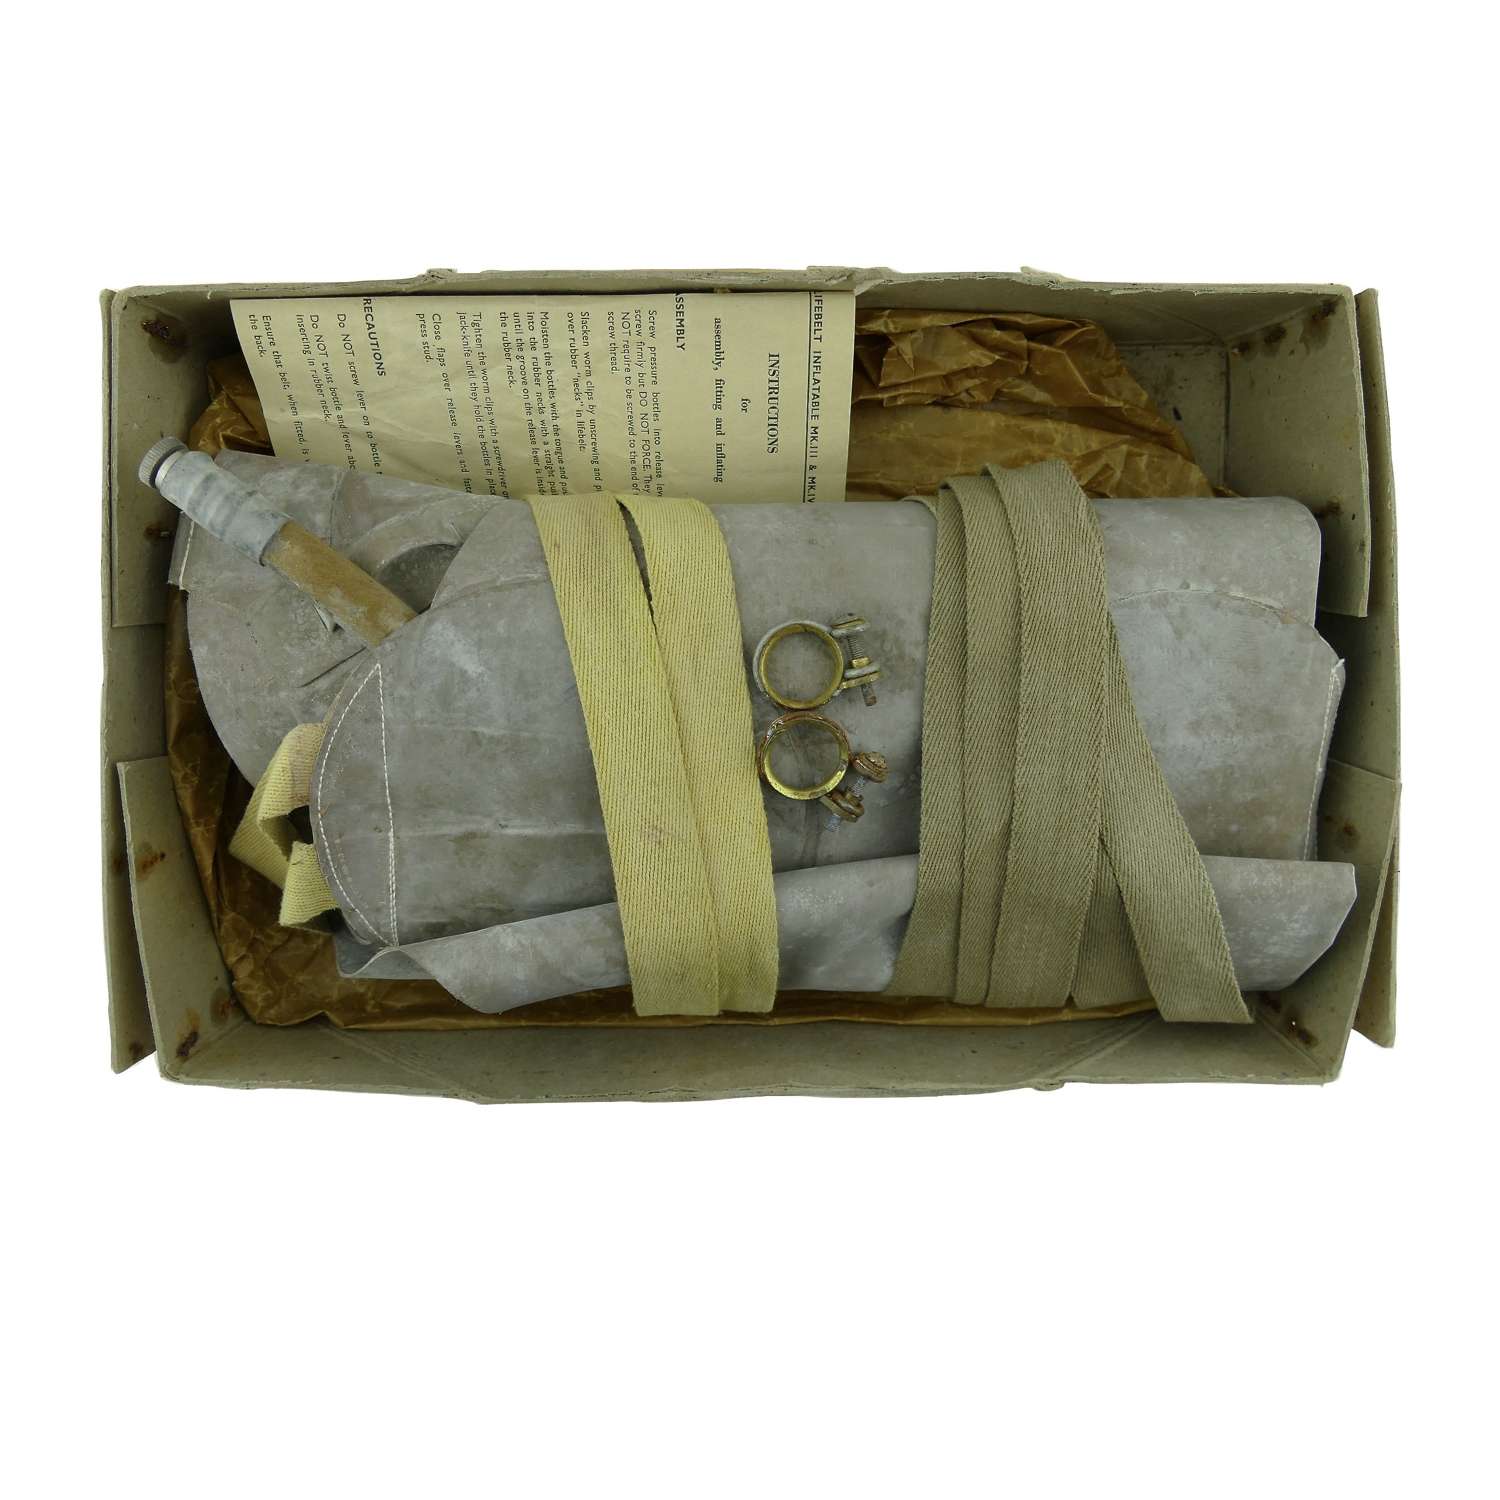 WW2 Airborne forces lifebelt, boxed